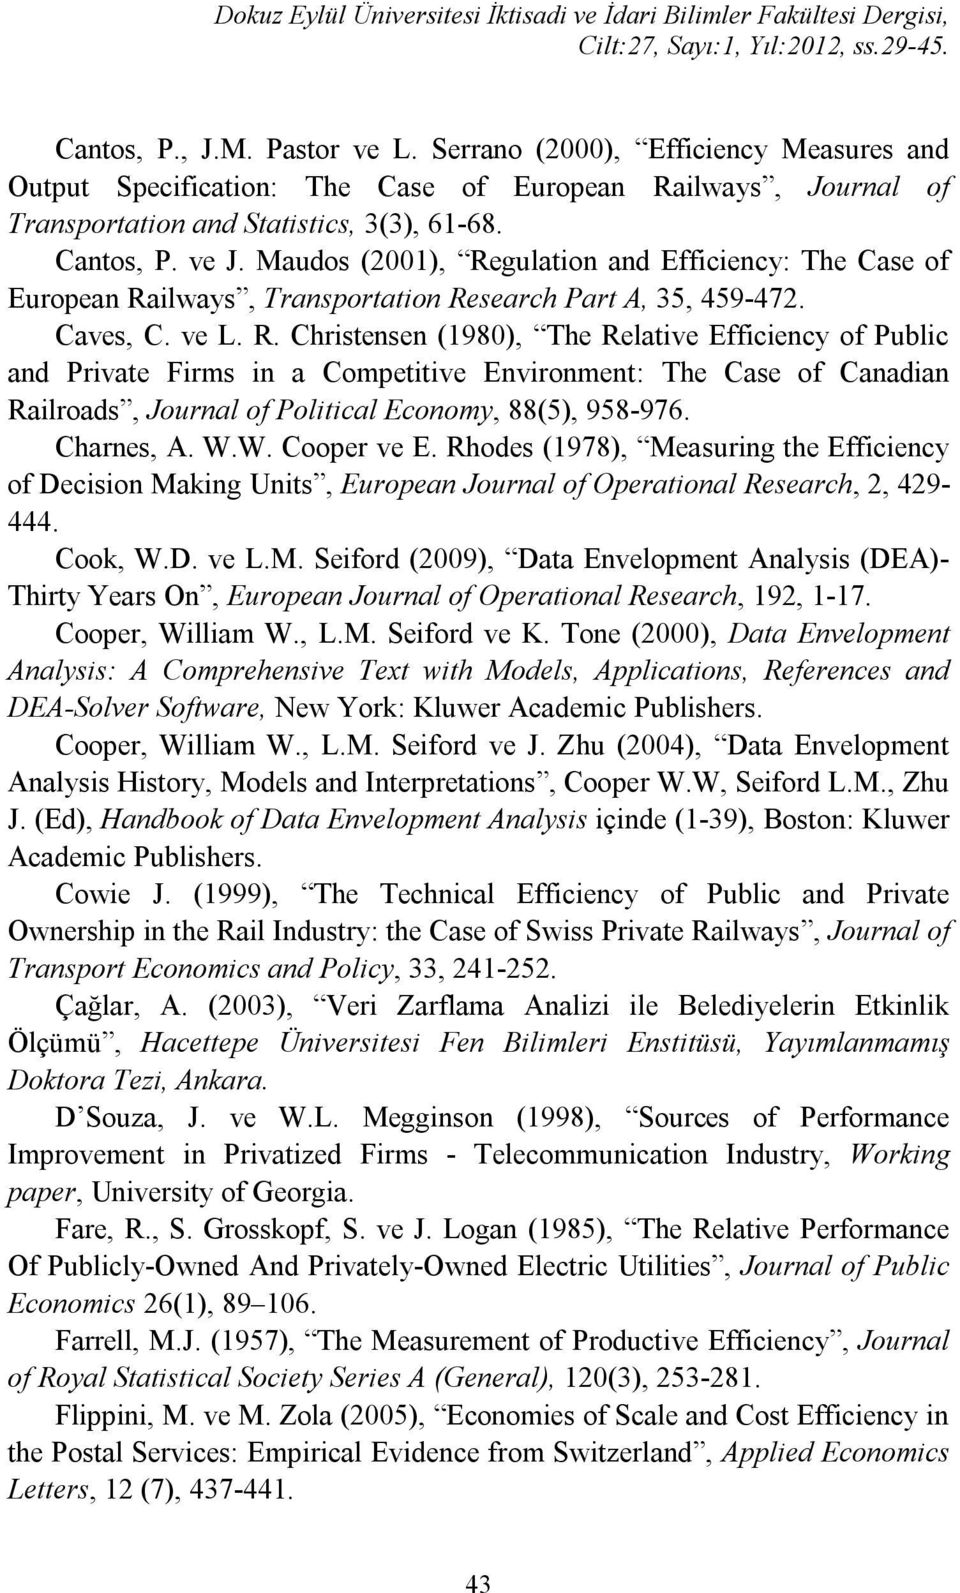 Maudo (2001), Regulation and Efficiency: The Cae of European Railway, Tranportation Reearch Part A, 35, 459-472. Cave, C. ve L. R. Chritenen (1980), The Relative Efficiency of Public and Private Firm in a Competitive Environment: The Cae of Canadian Railroad, Journal of Political Economy, 88(5), 958-976.